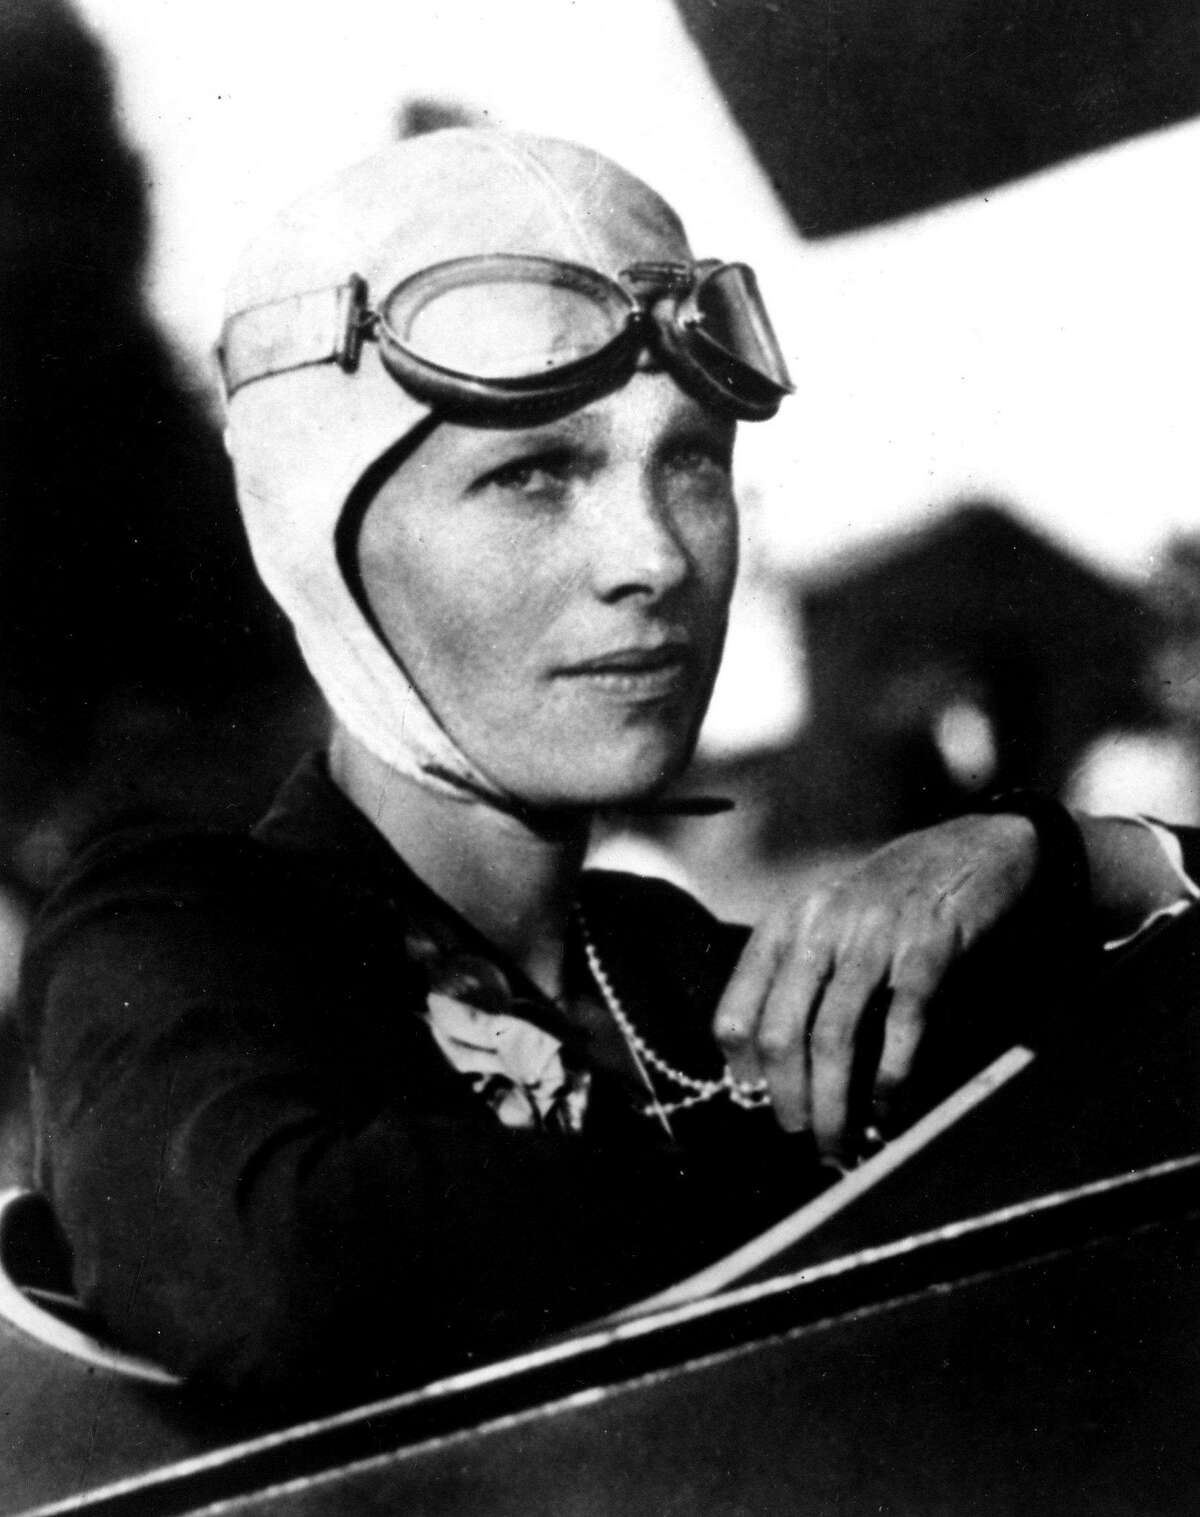 And how did you like the flight, Ms. Earhart?